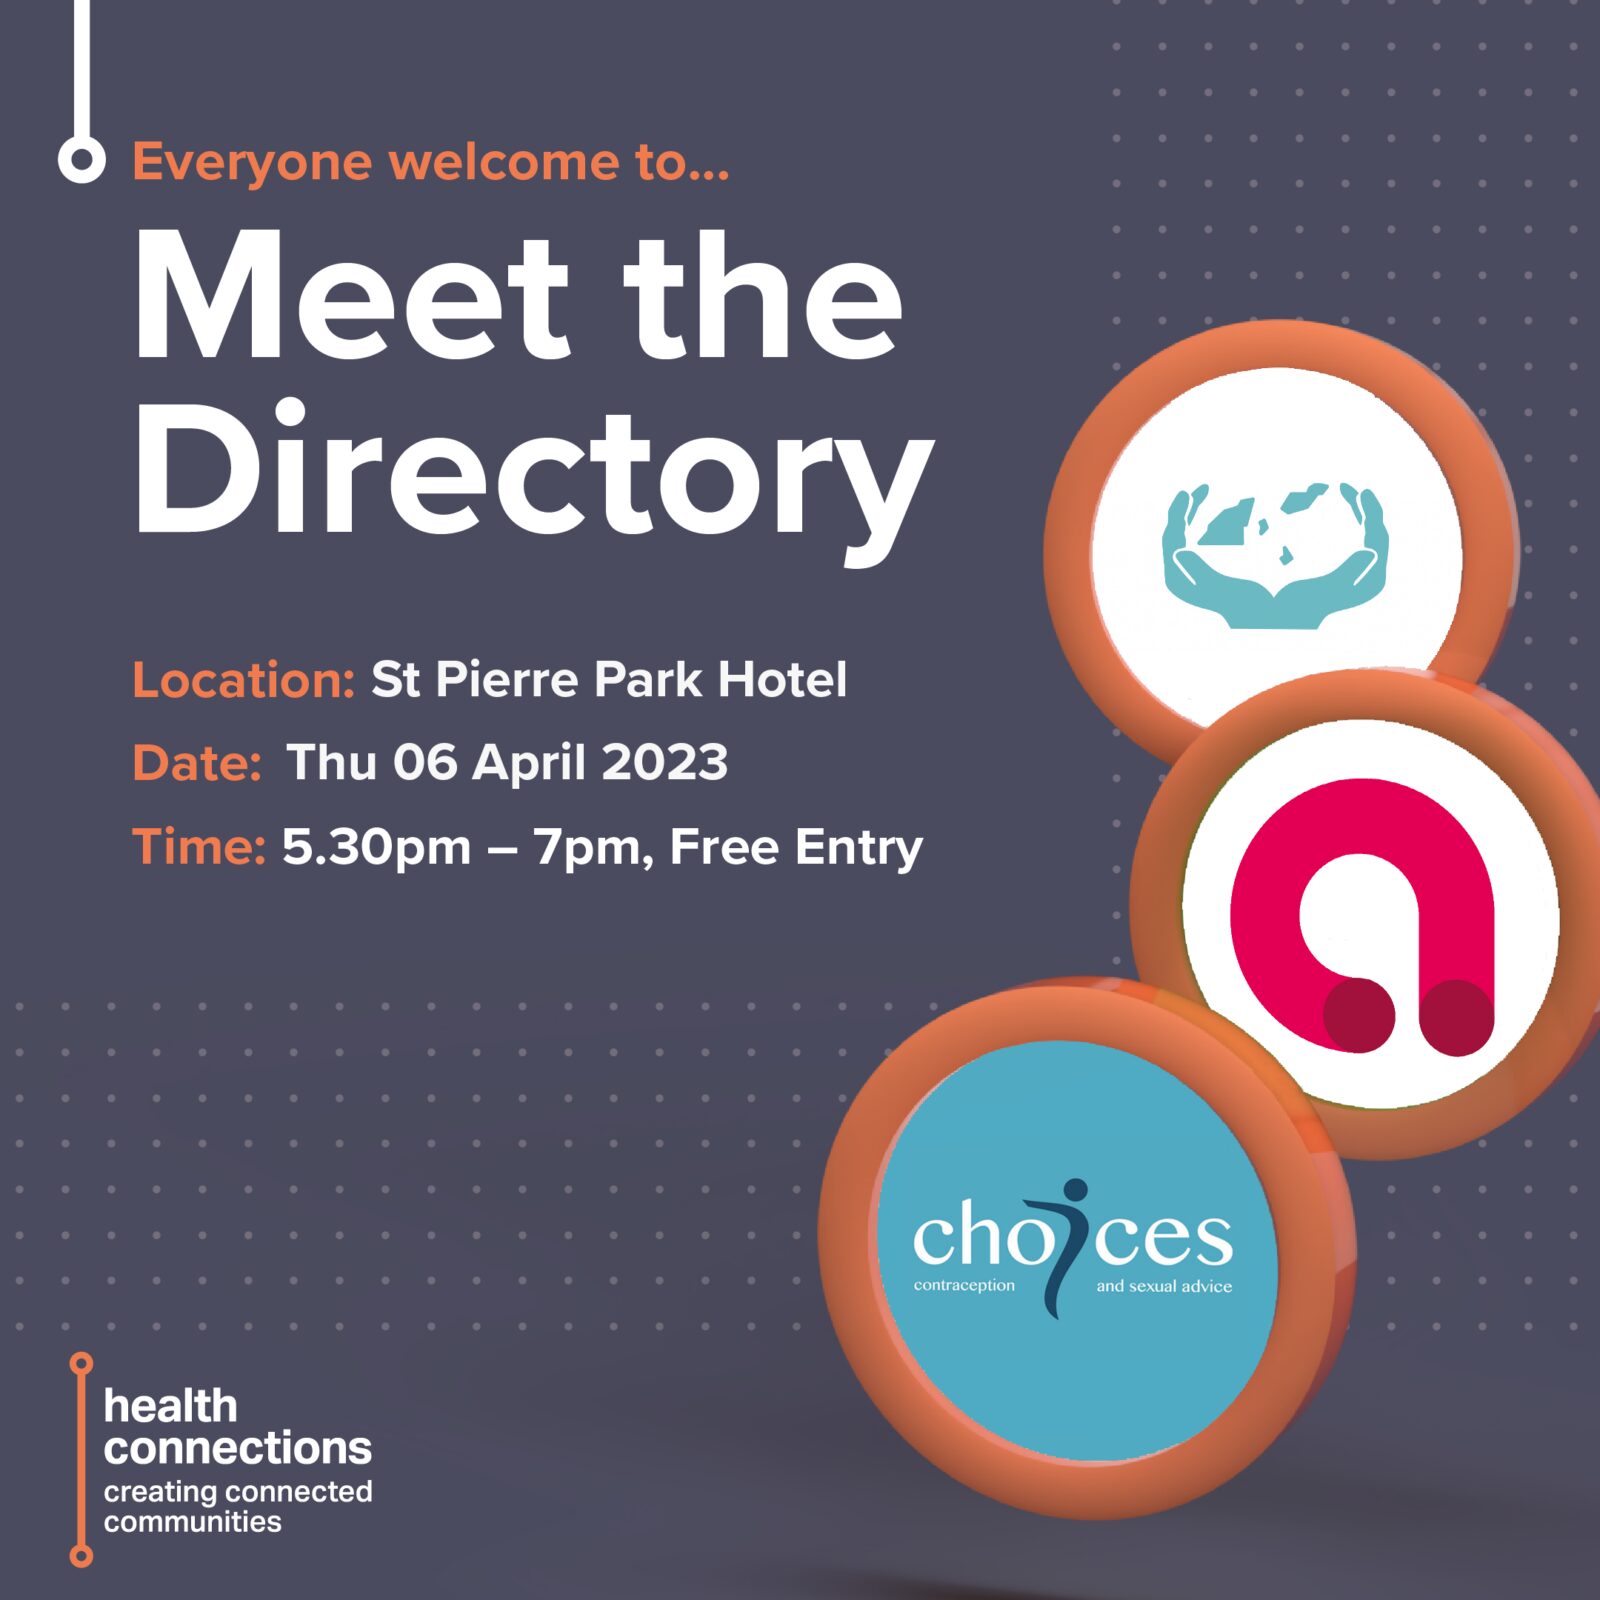 Come along to the April Meet The Directory event